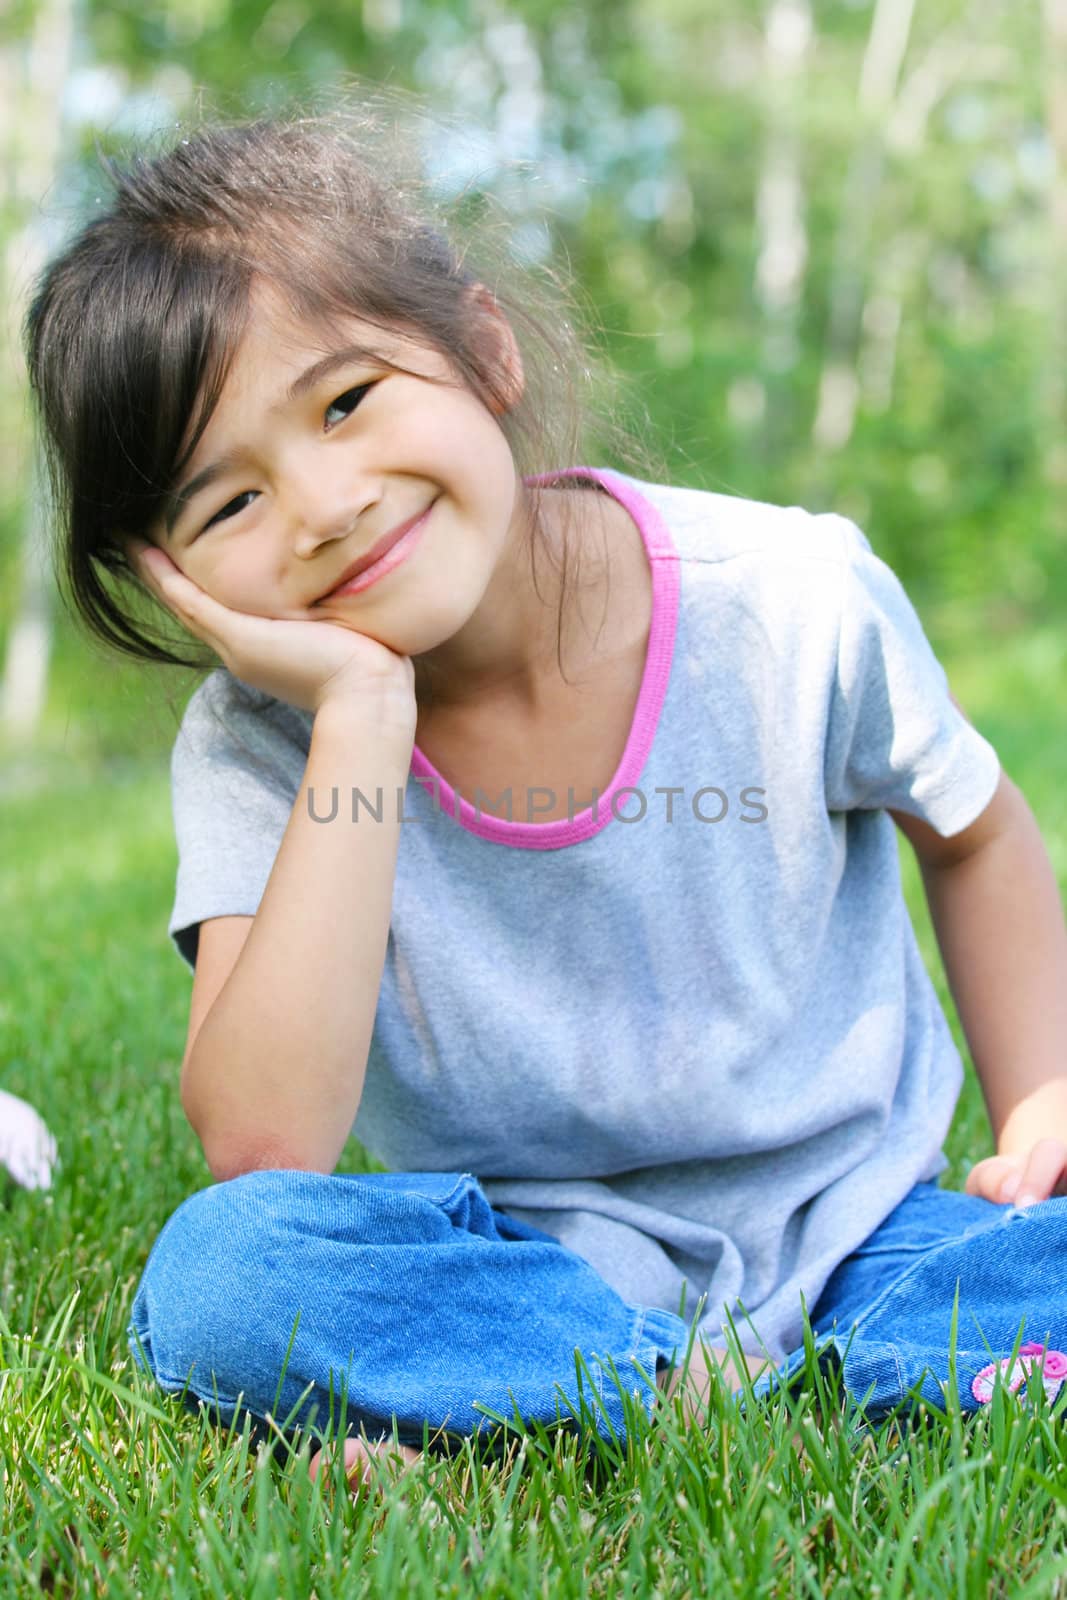 Child sitting on grass with a thoughtful expression. by jarenwicklund